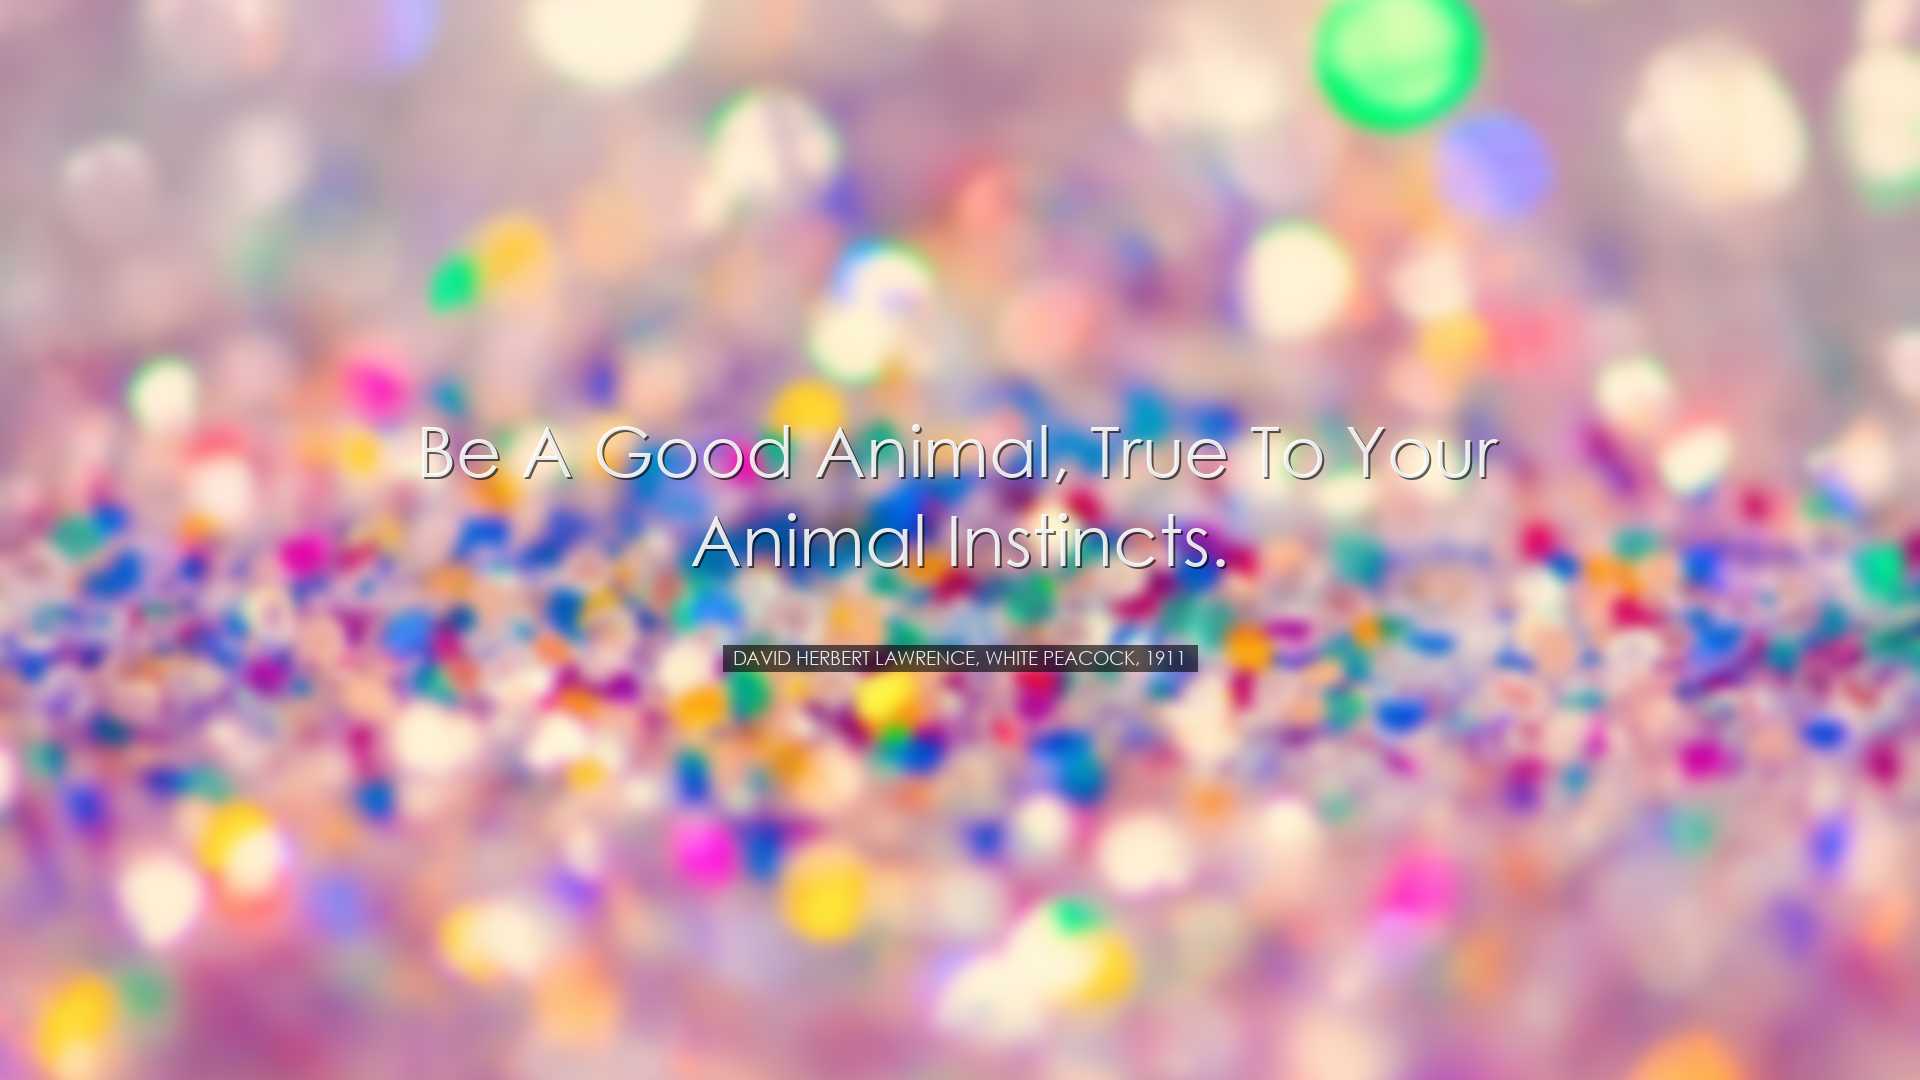 Be a good animal, true to your animal instincts. - David Herbert L